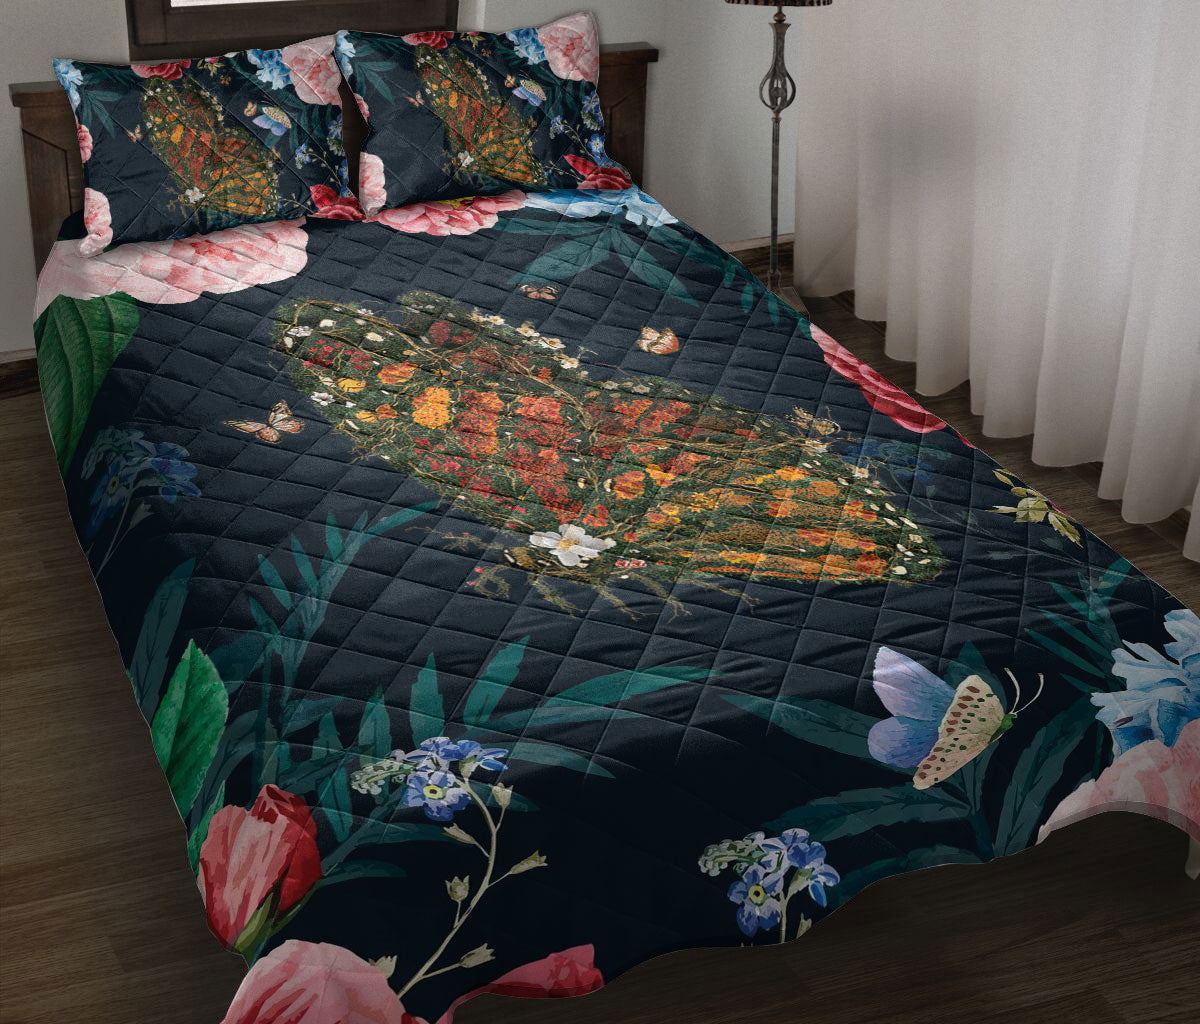 Ohaprints-Quilt-Bed-Set-Pillowcase-Butterfly-Find-My-Soul-Flower-Garden-Floral-Pattern-Gift-For-Butterfly-Lover-Blanket-Bedspread-Bedding-1202-Throw (55'' x 60'')